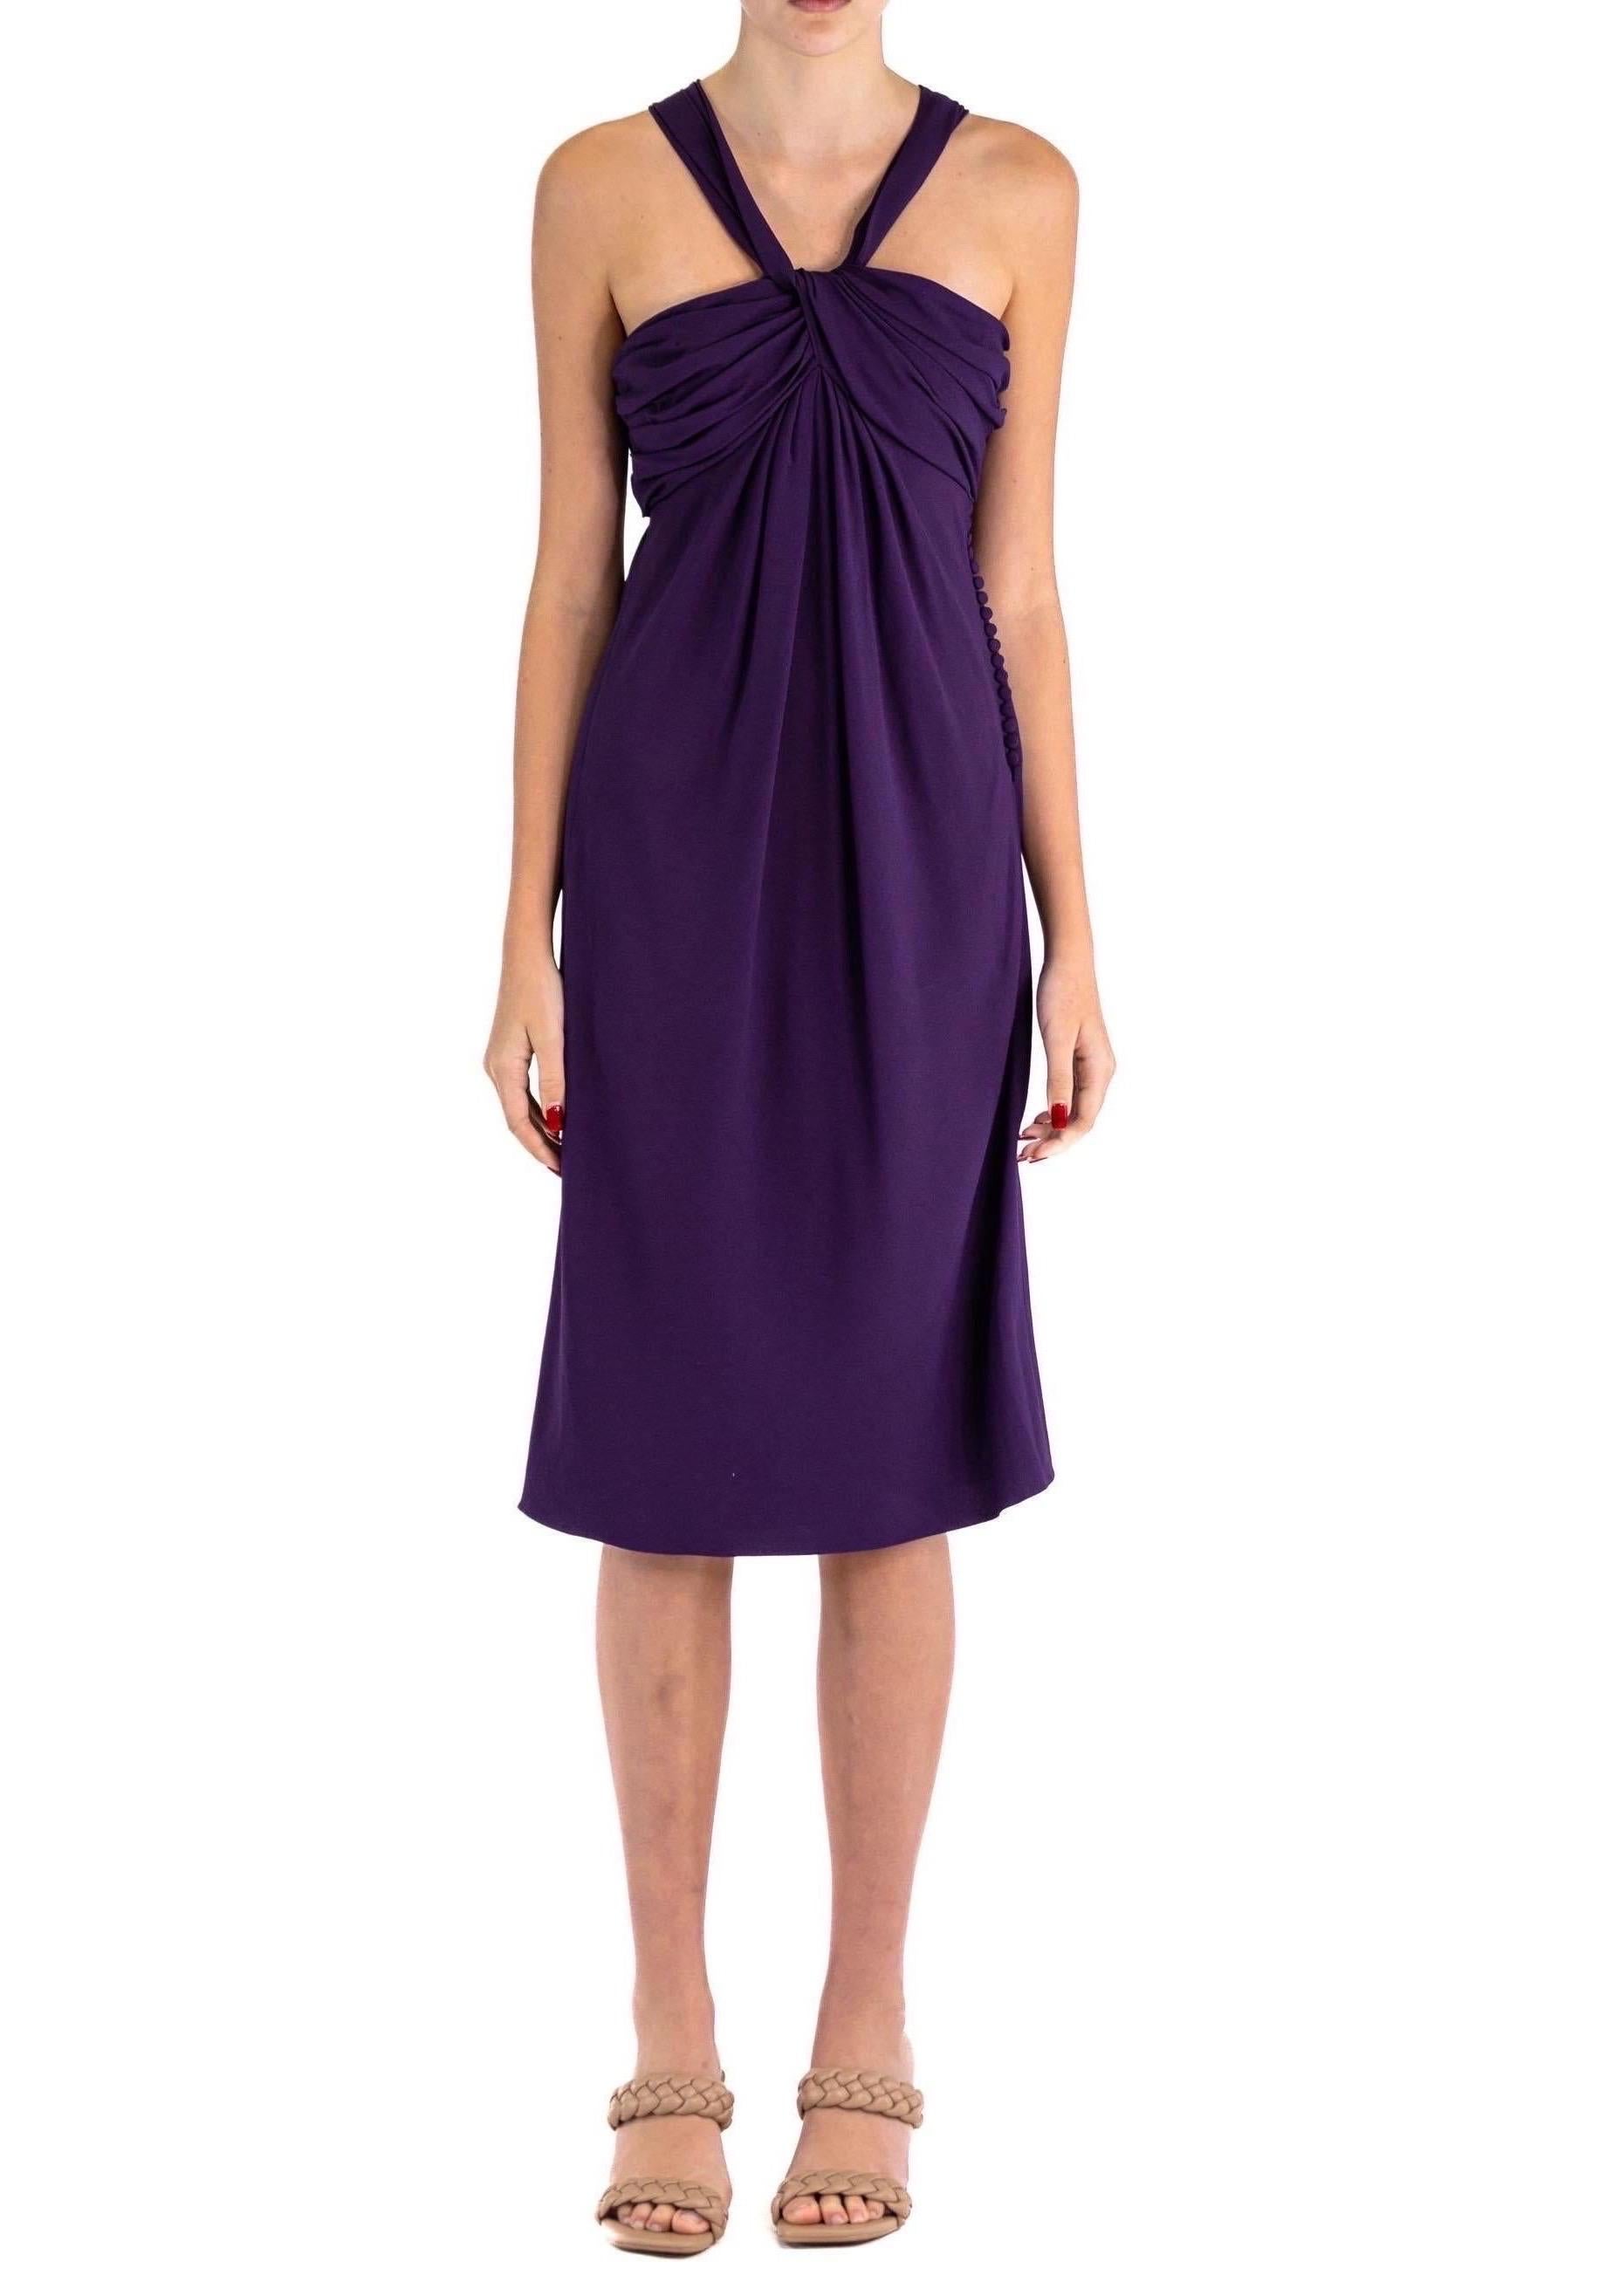 1990S JOHN GALLIANO CHRISTIAN DIOR Purple Rayon & Silk Chiffon Cocktail Dress With Ruched Shoulder Straps